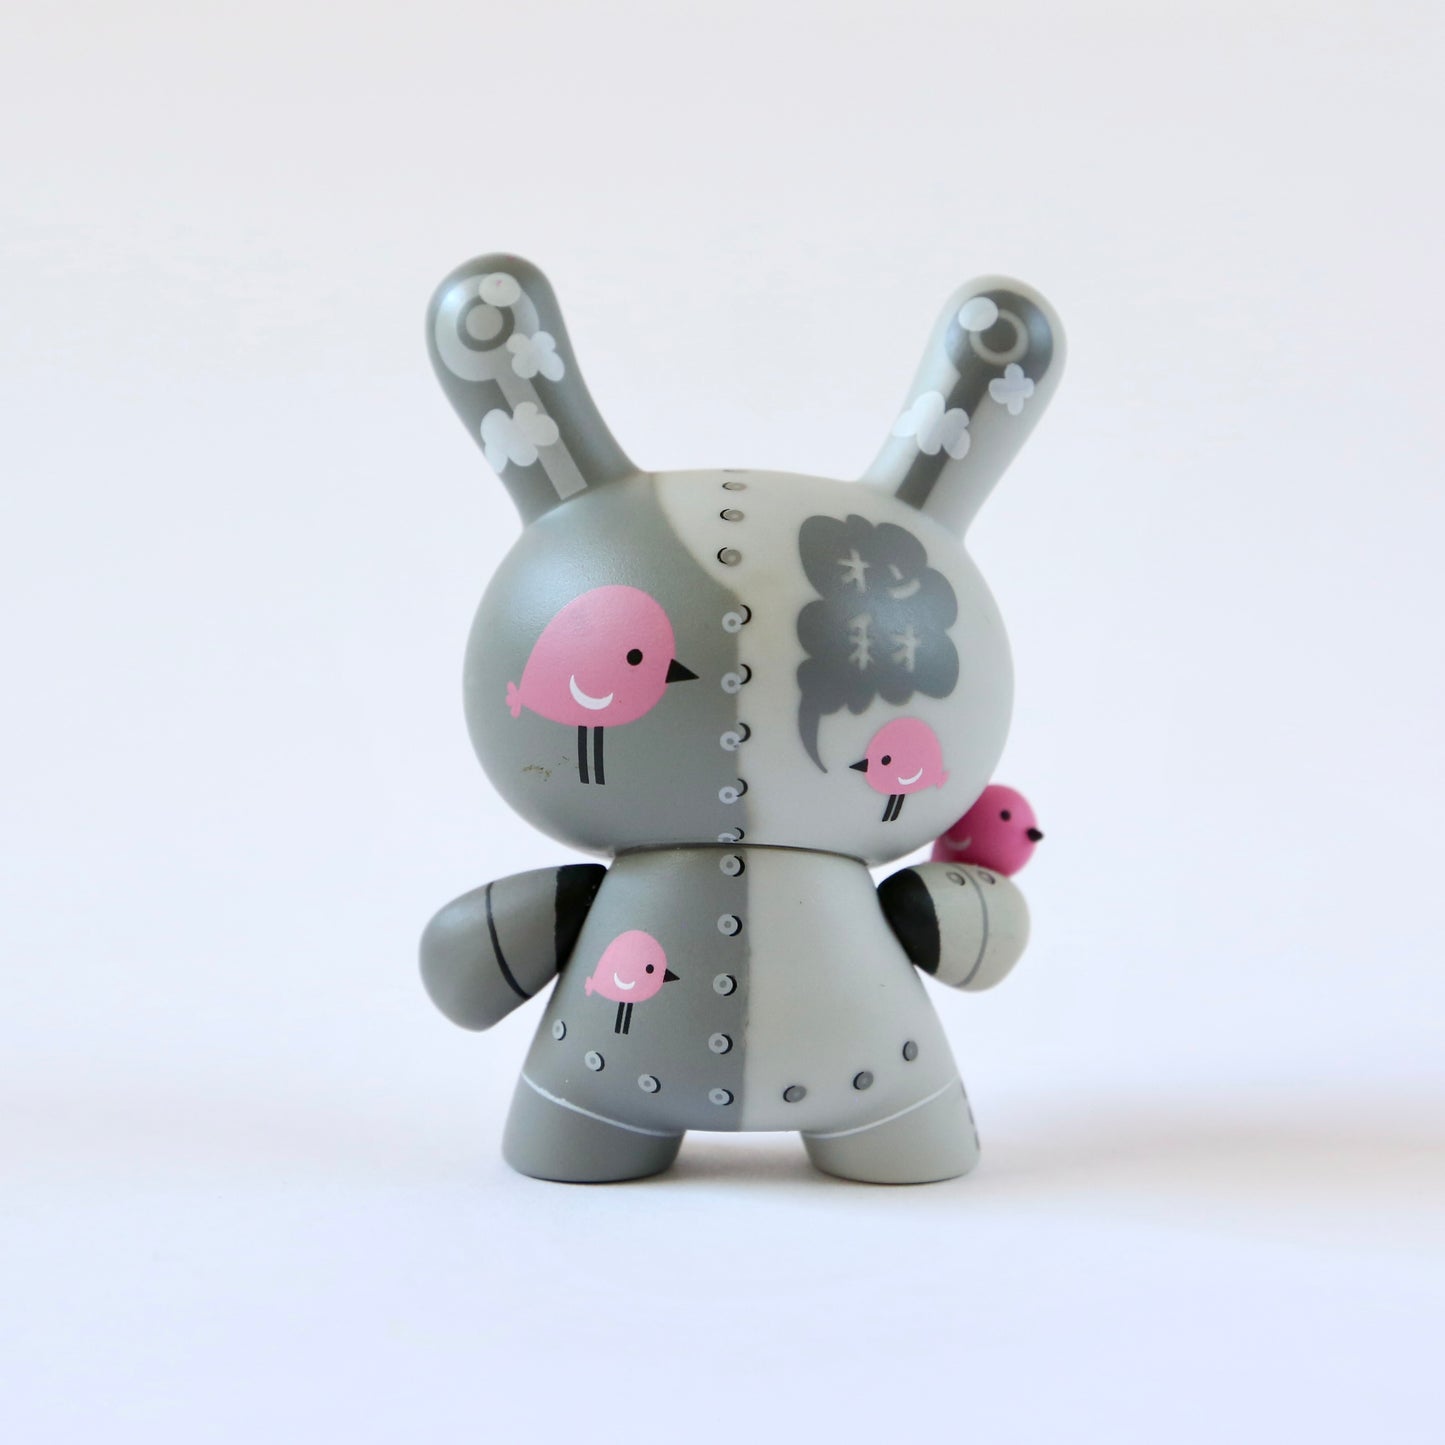 2TONE 3in Dunny by Tad Carpenter x Kidrobot (1/16)